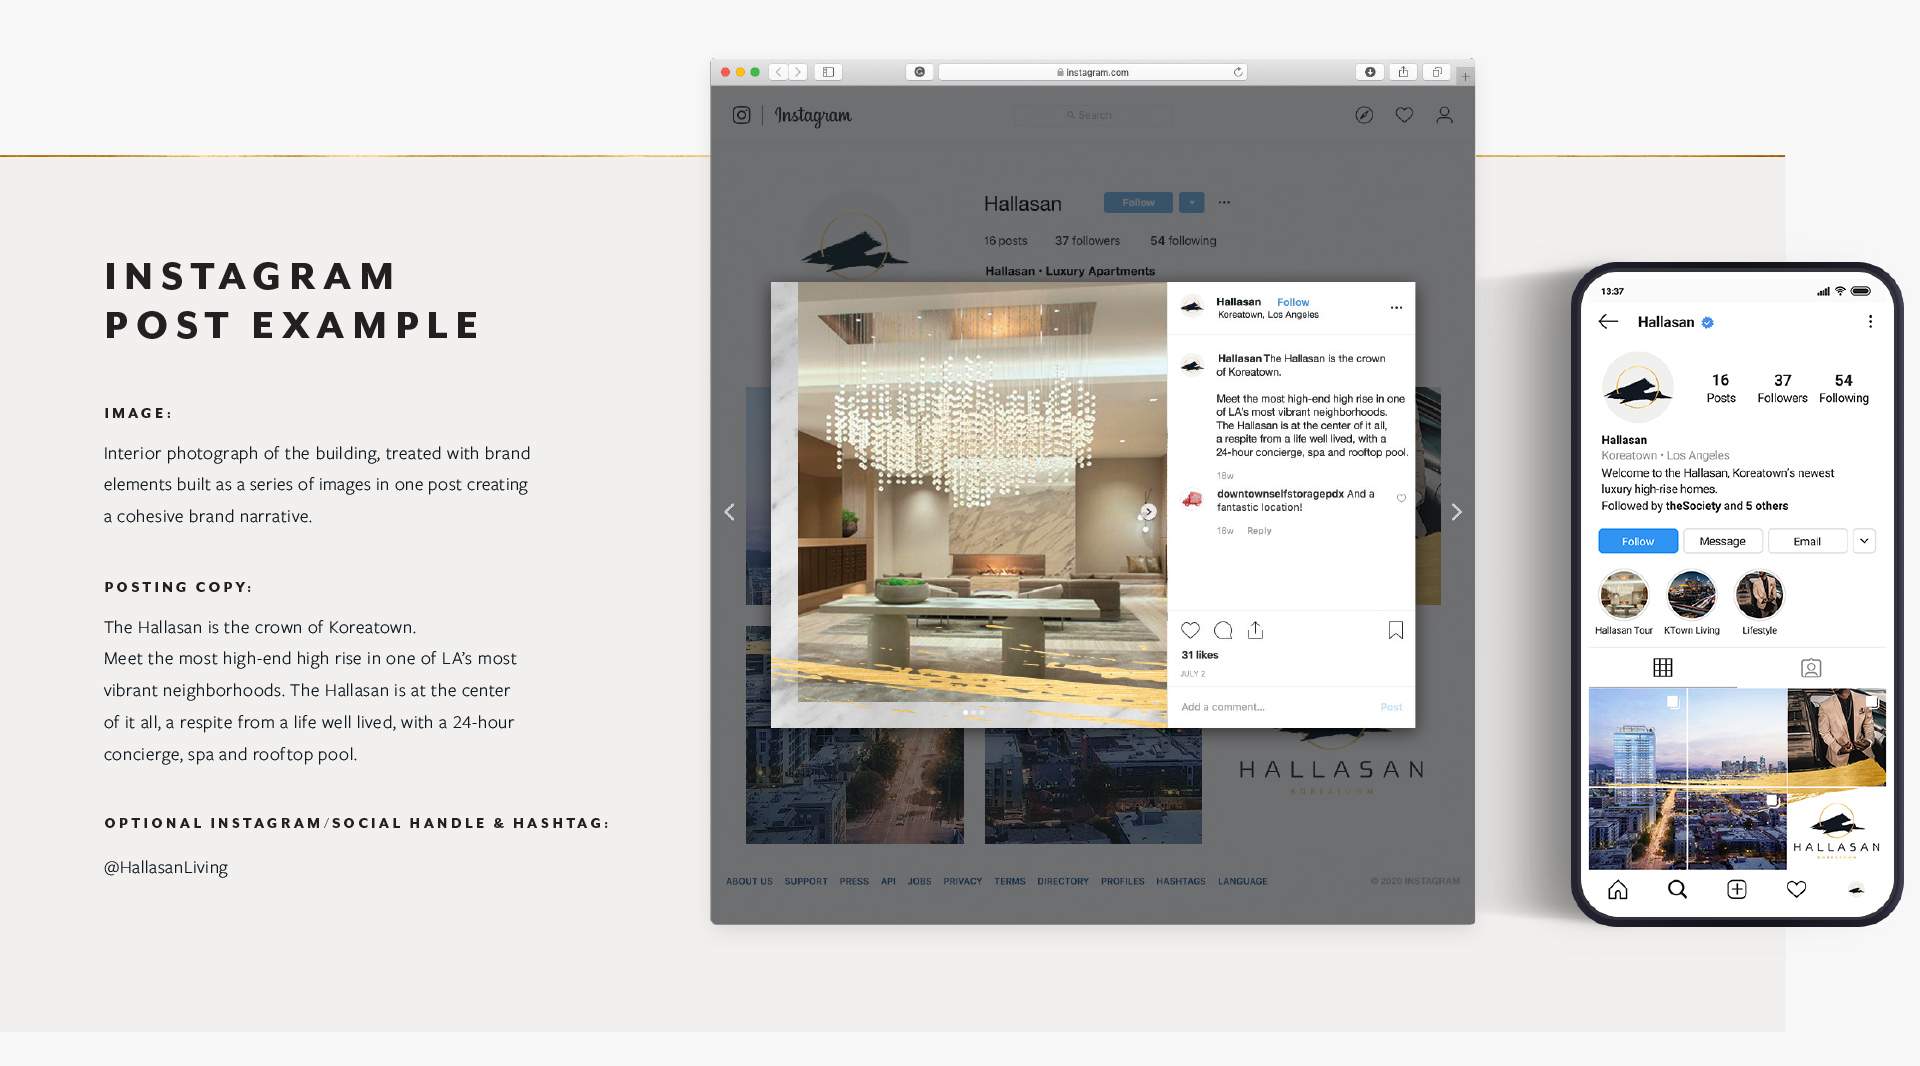 Social media post example created for Hallasan Luxury Apartments brand by Incubate Design